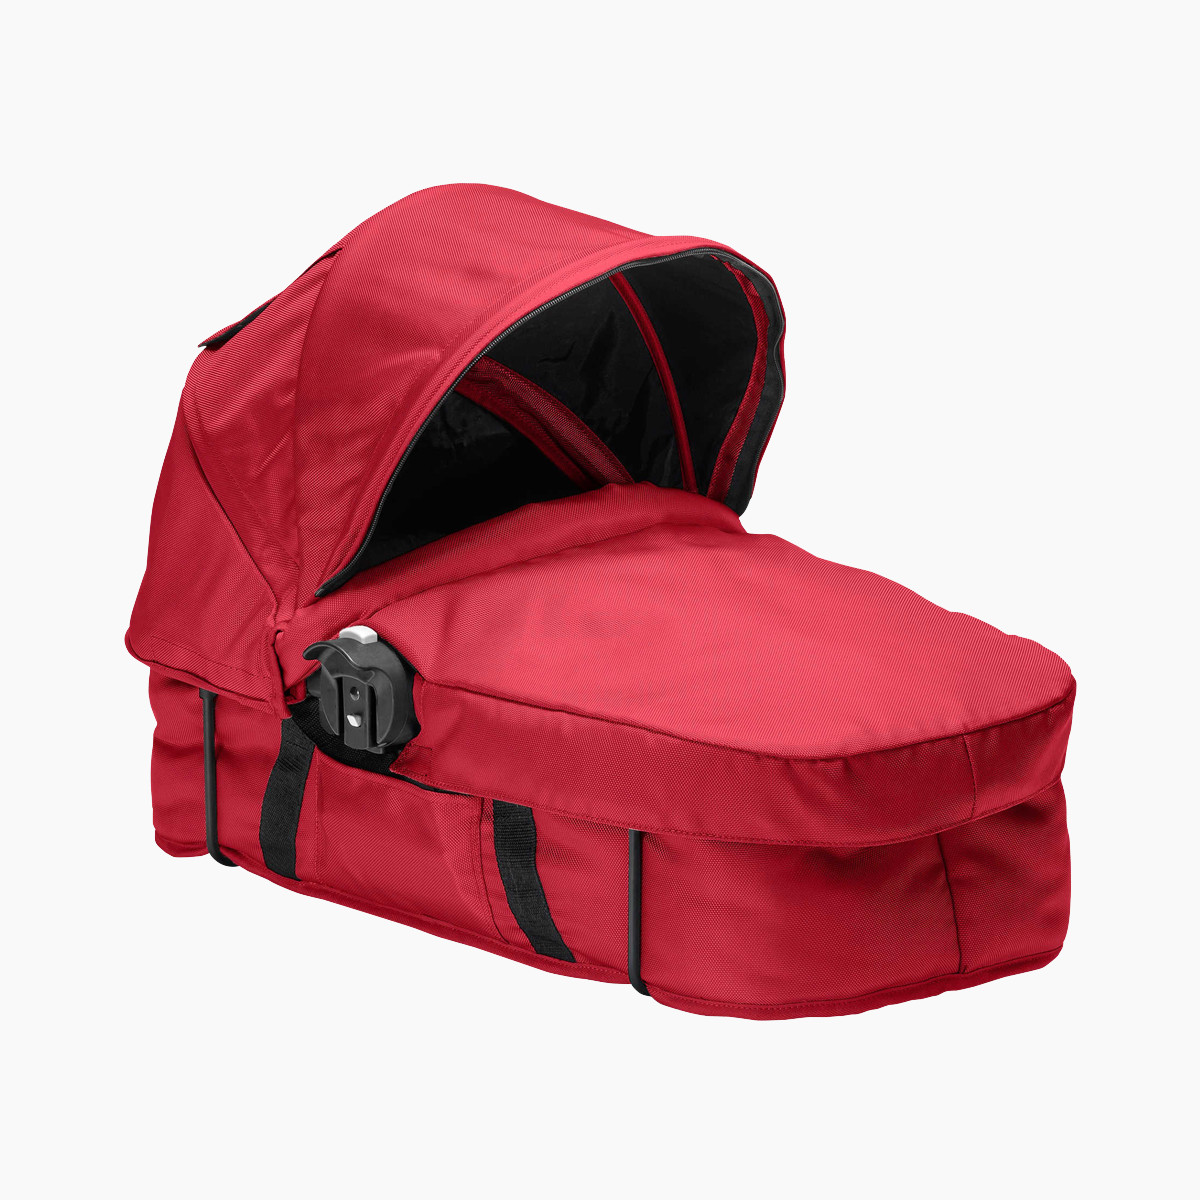 Baby Jogger City Select Bassinet Kit - Red.